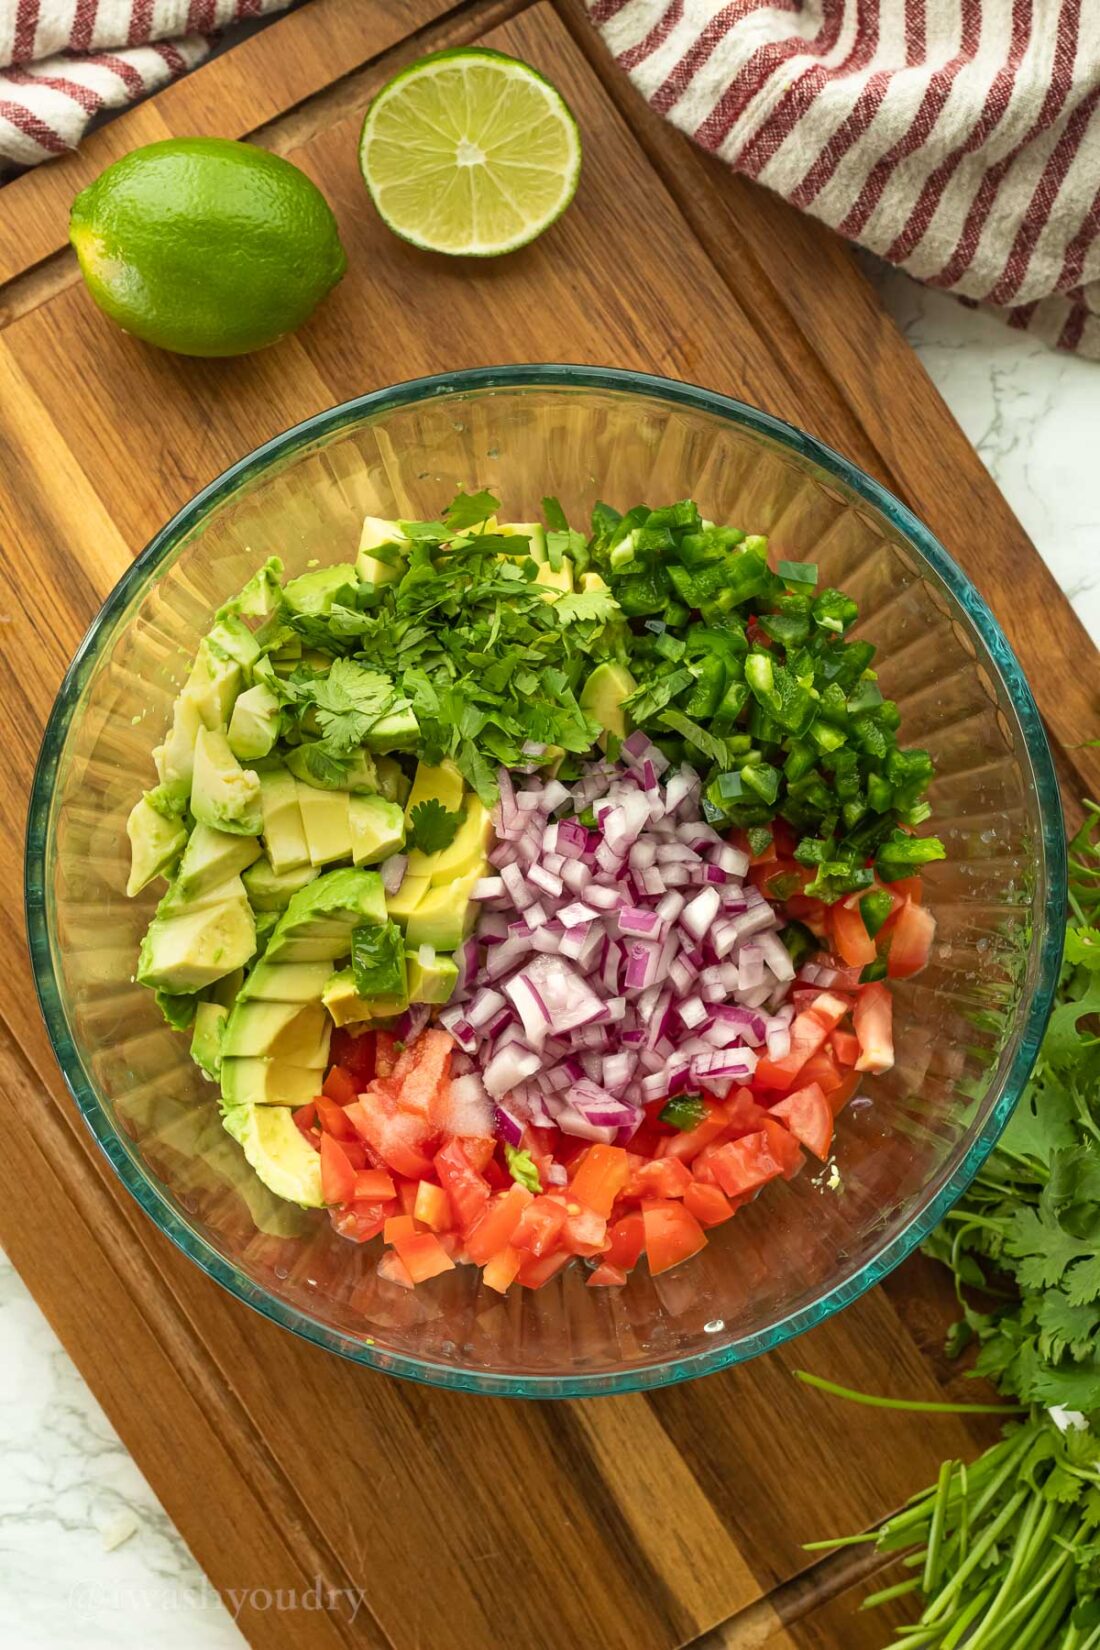 Avocado, jalapeno, purple onion, tomato, cilantro, and lime juice in glass bowl on wooden cutting board. 